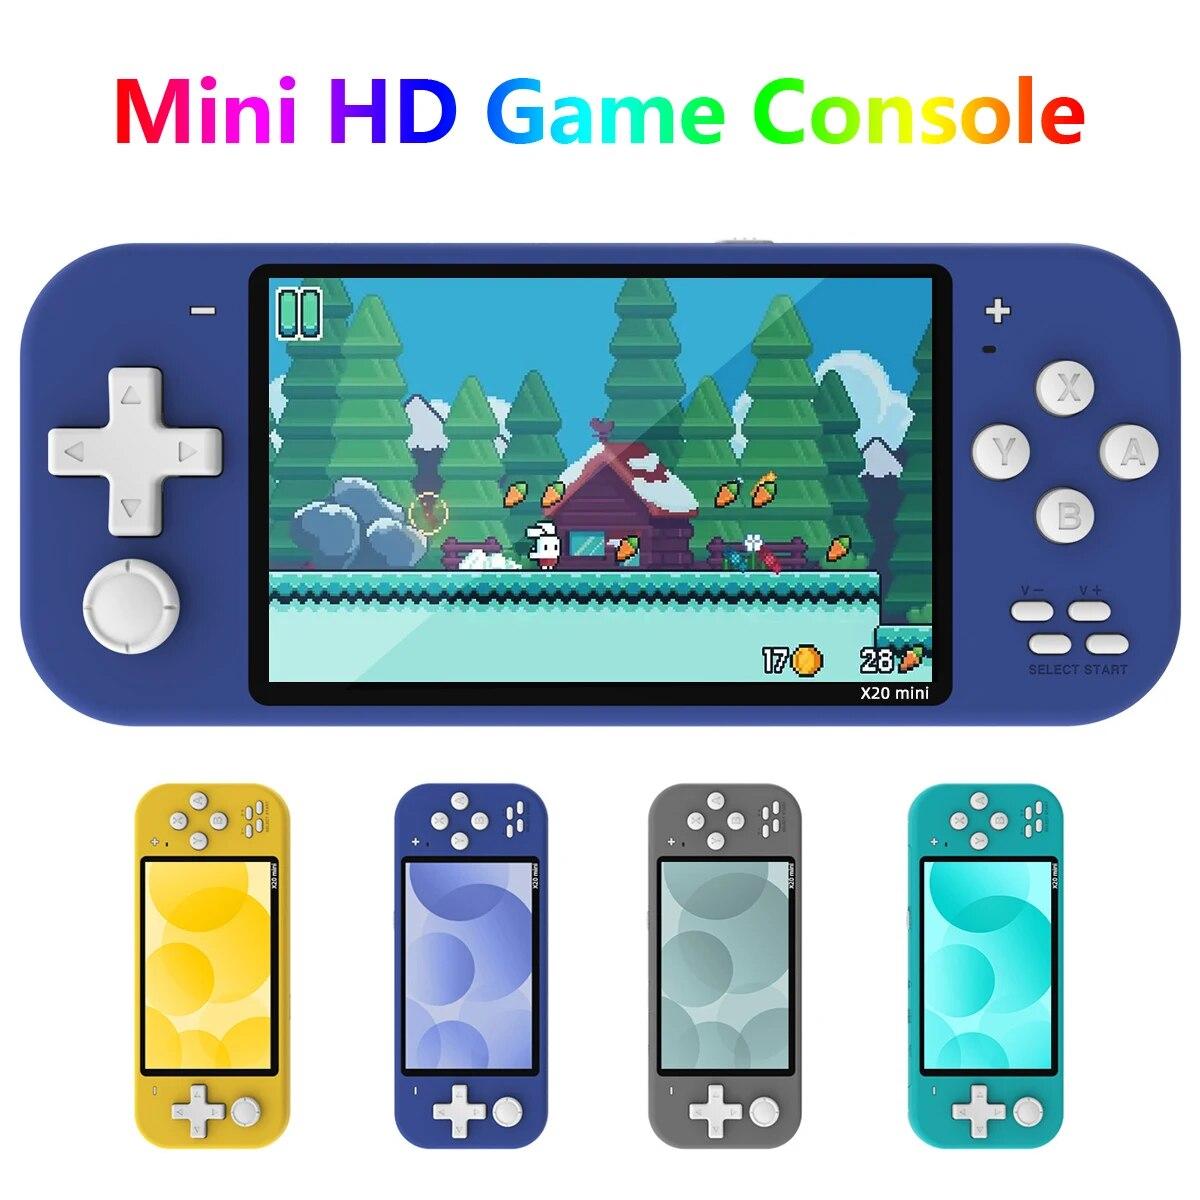 Little Tao X20 Mini Video Game Console Built-in 1000 Games HD Portable Retro Video Game Console Player 8GB for MAME/GBC/MD/FC/SFC Kids Gift